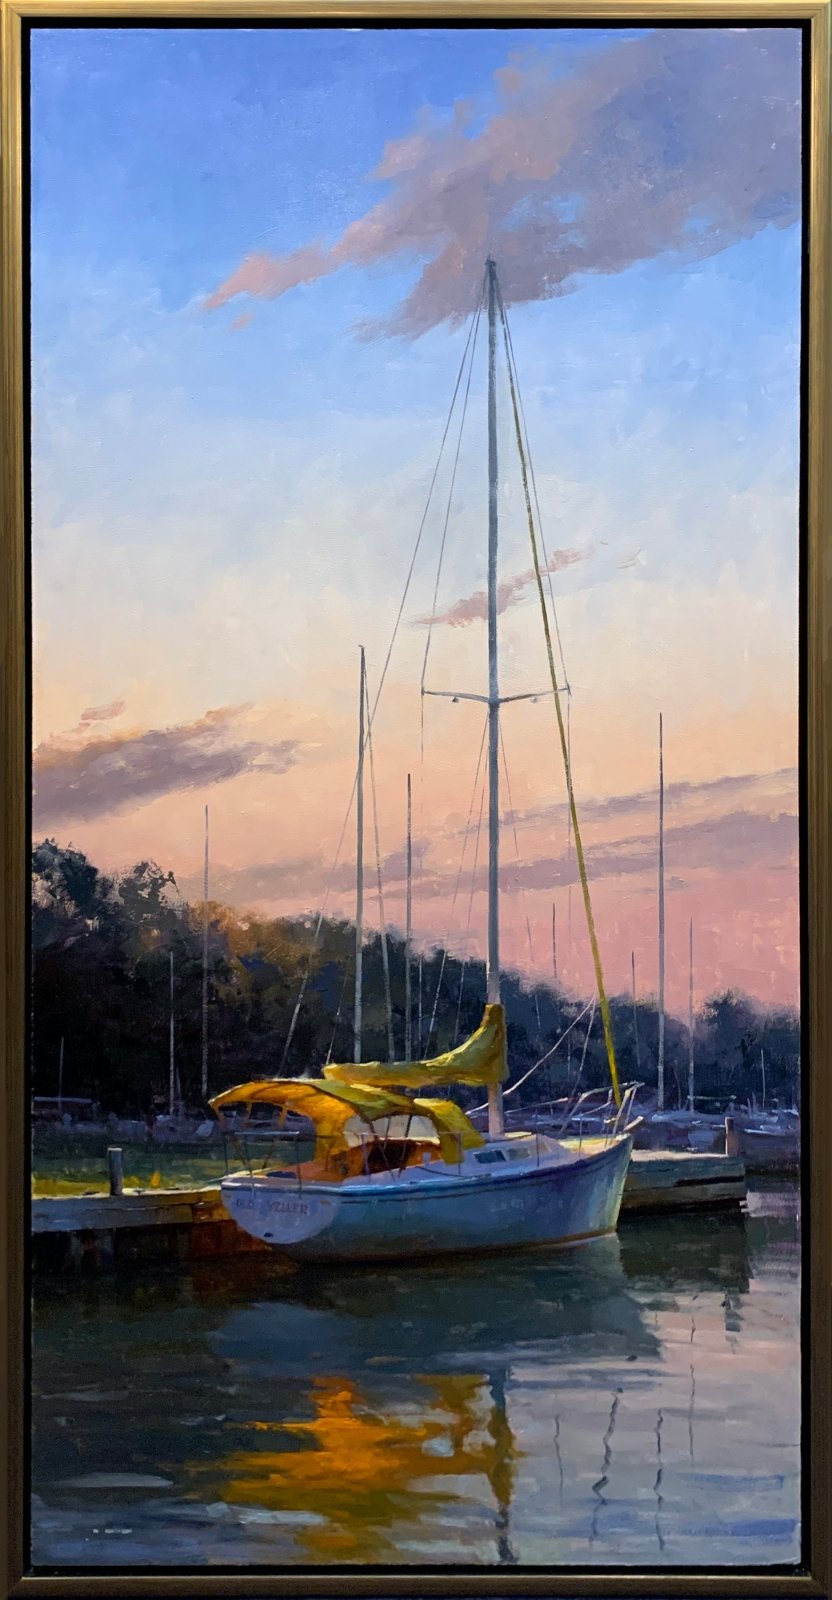 Itsy Bitsy Teenie Weenie Yellow Canvas Boat Bimini by Marc Anderson at LePrince Galleries